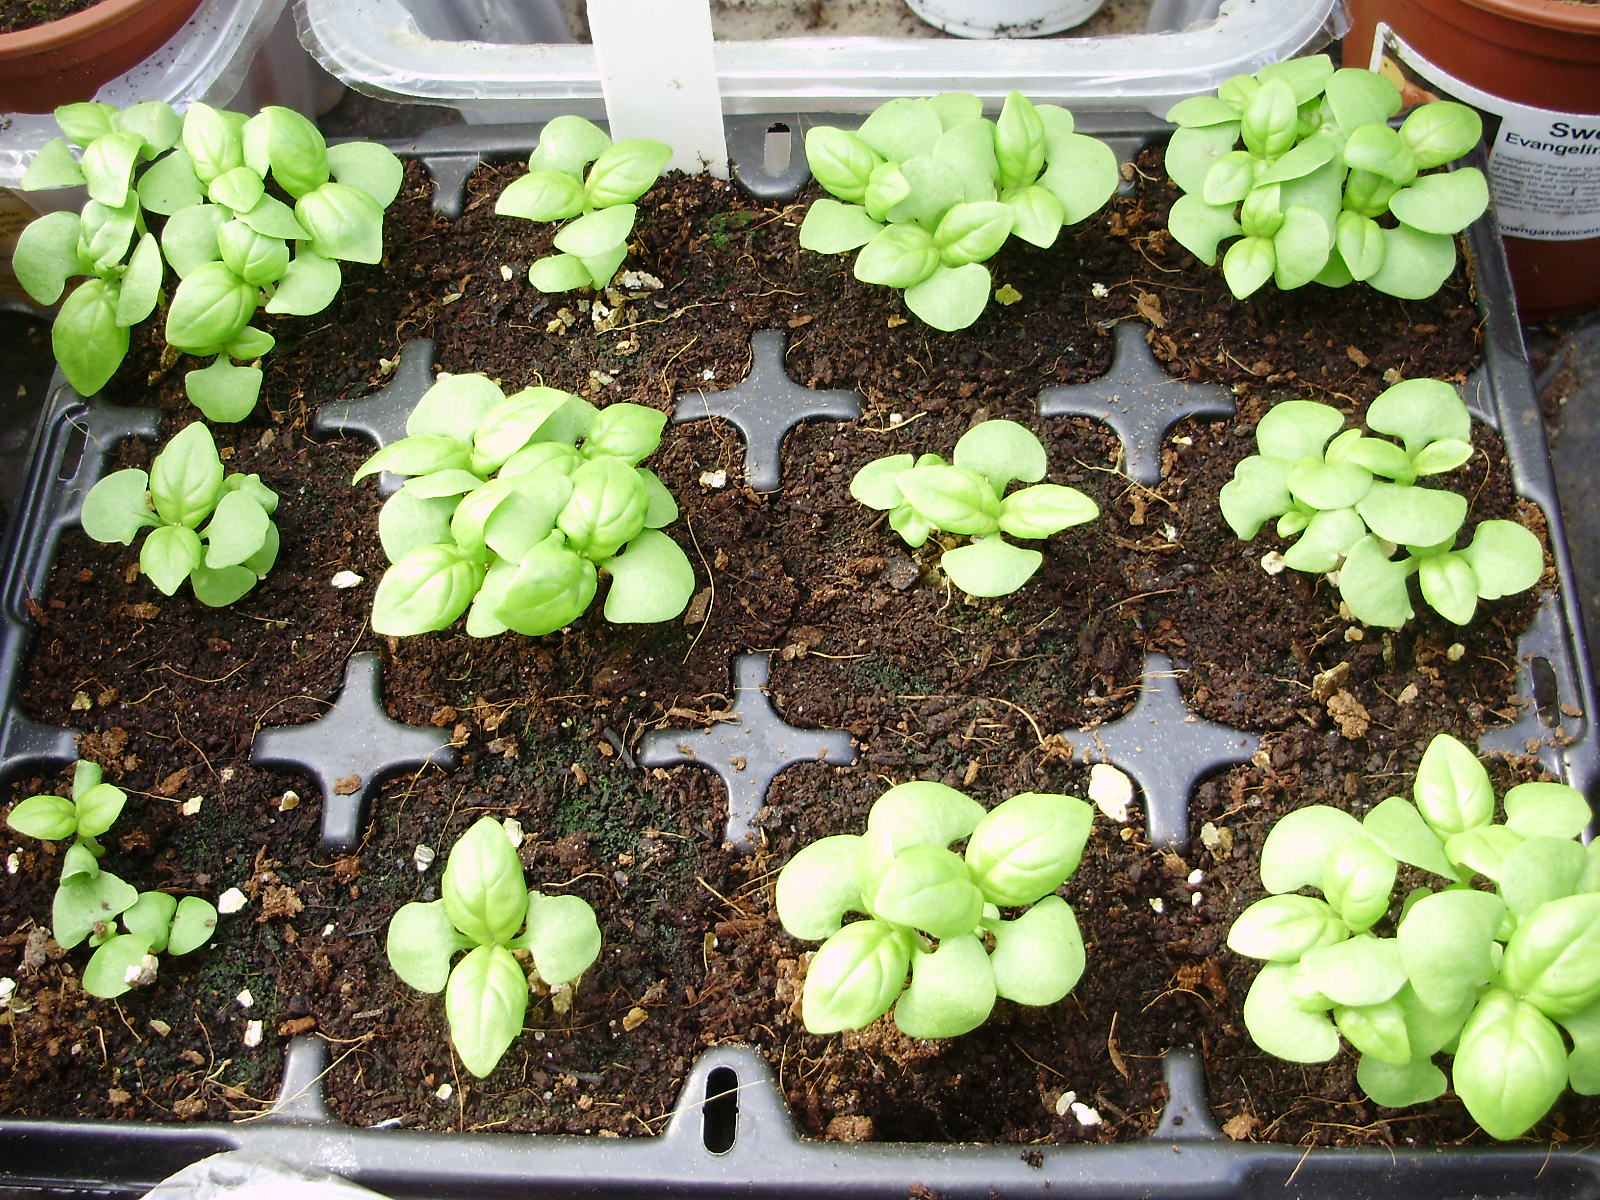 14. Basil seedlings sown in organic compost mid April. Pictured 3 weeks later ready for potting on